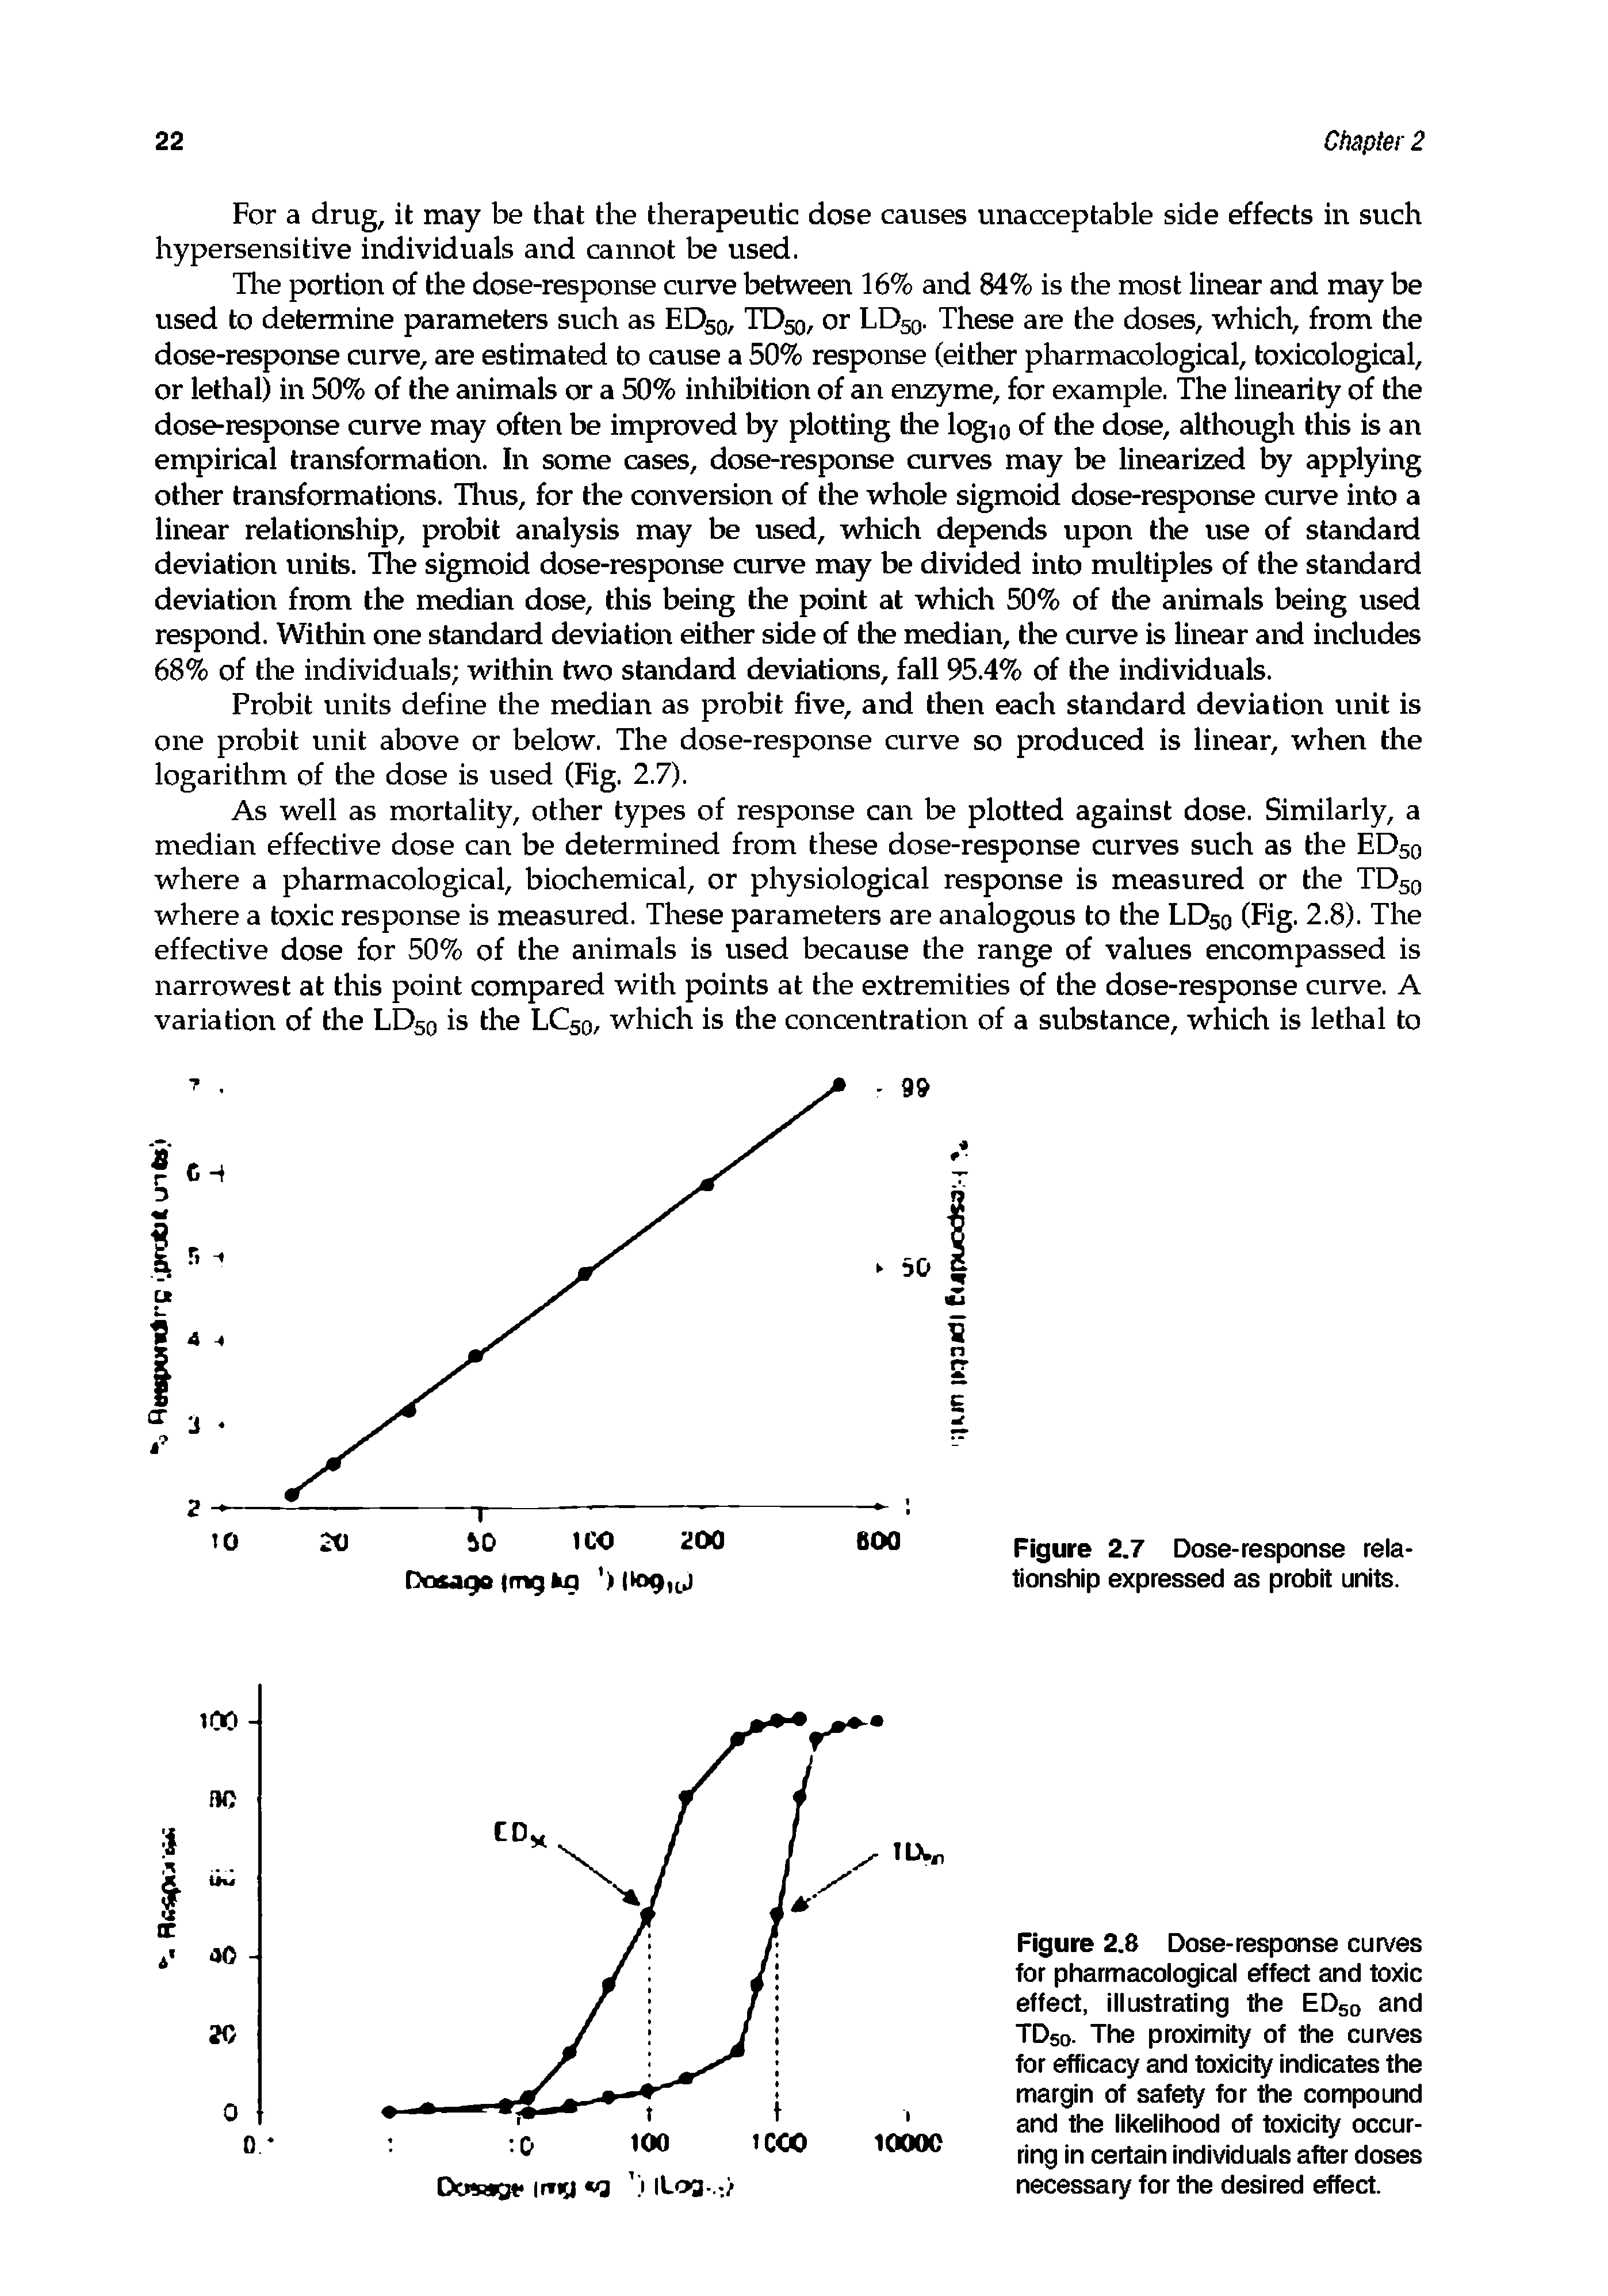 Figure 2.8 Dose-response curves for pharmacological effect and toxic effect, illustrating the EDS0 and TD50. The proximity of the curves for efficacy and toxicity indicates the margin of safety for the compound and the likelihood of toxicity occurring in certain individuals after doses necessary for the desired effect.